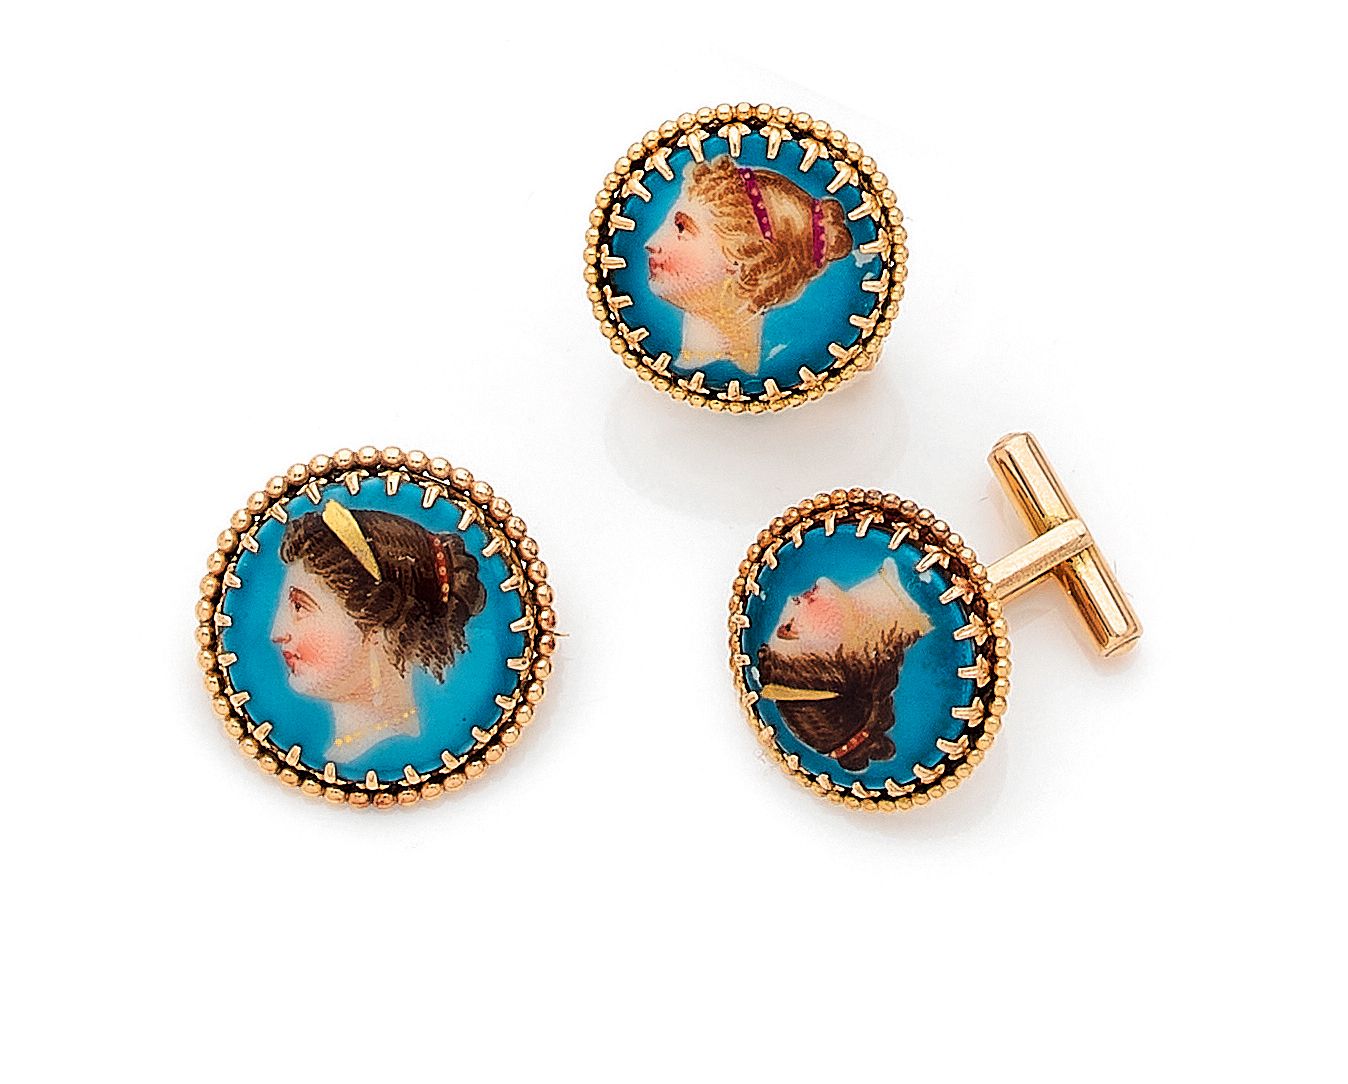 Null end of the 19th century

ADORNMENT

composed of a pair of cufflinks and a b&hellip;